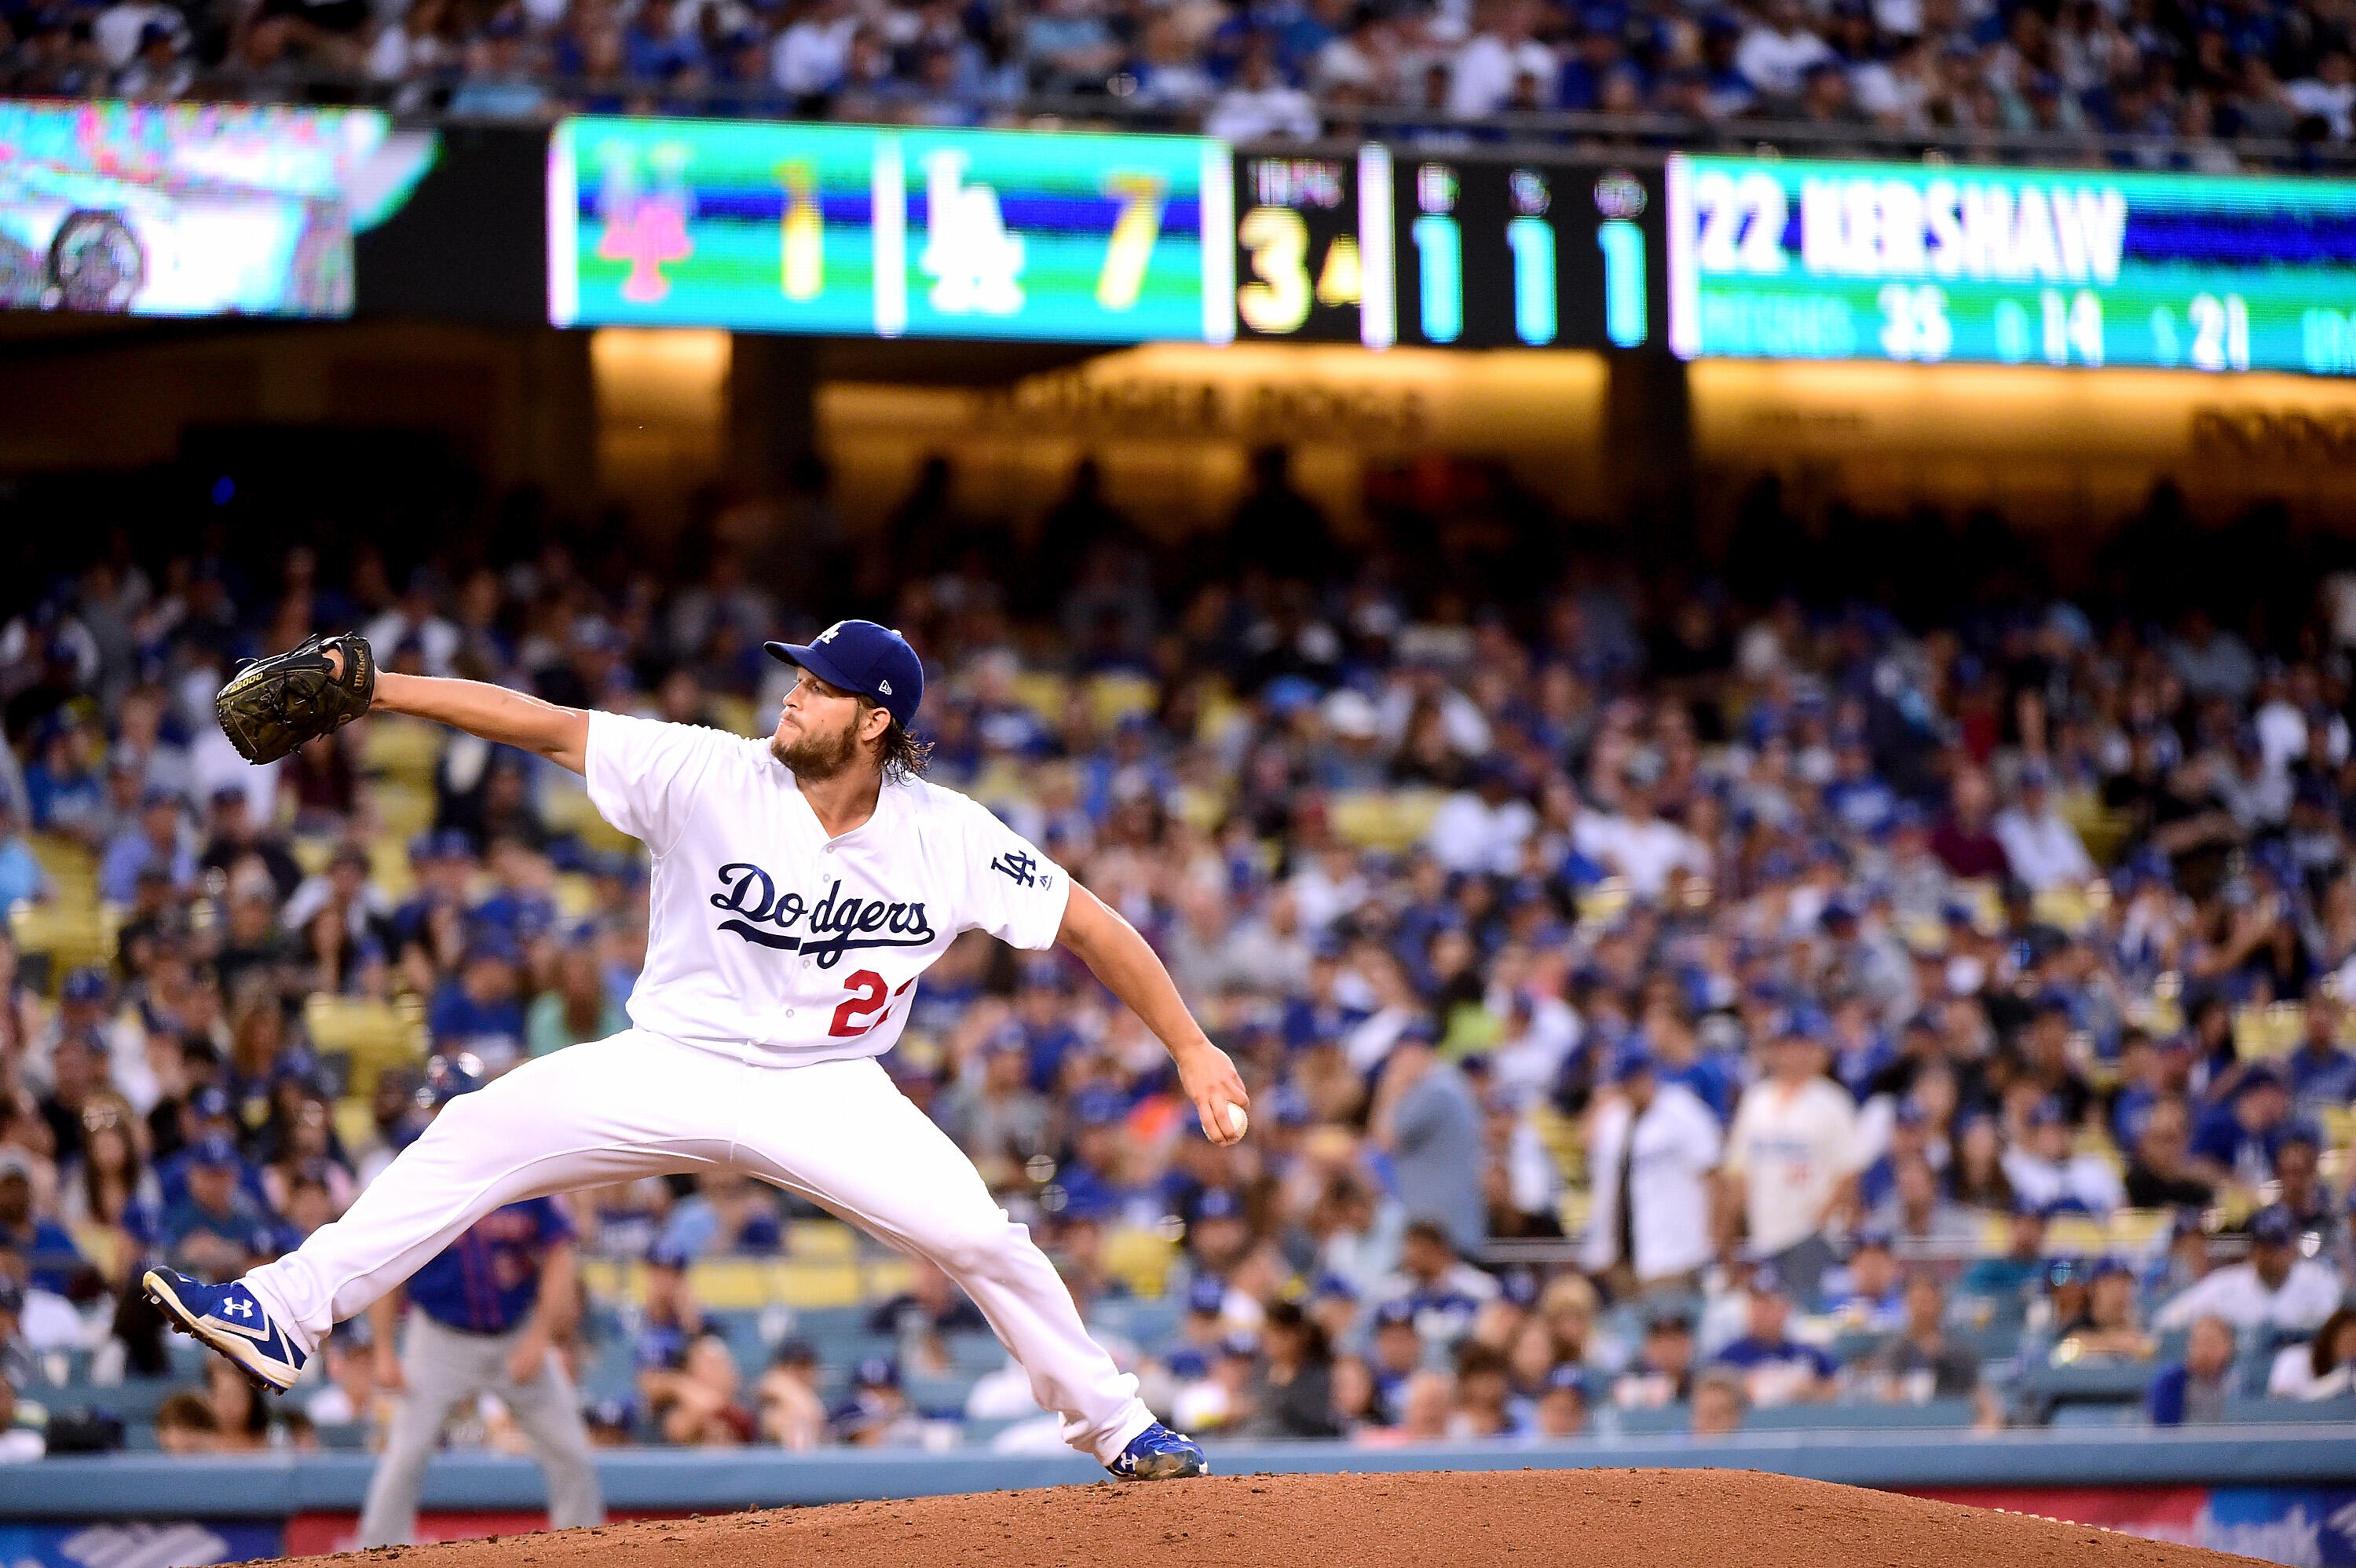 LOS ANGELES, CA - JUNE 19:  Clayton Kershaw #22 of the Los Angeles Dodgers pitches to the New York Mets during the fourth inning against the New York Mets at Dodger Stadium on June 19, 2017 in Los Angeles, California.  (Photo by Harry How/Getty Images)